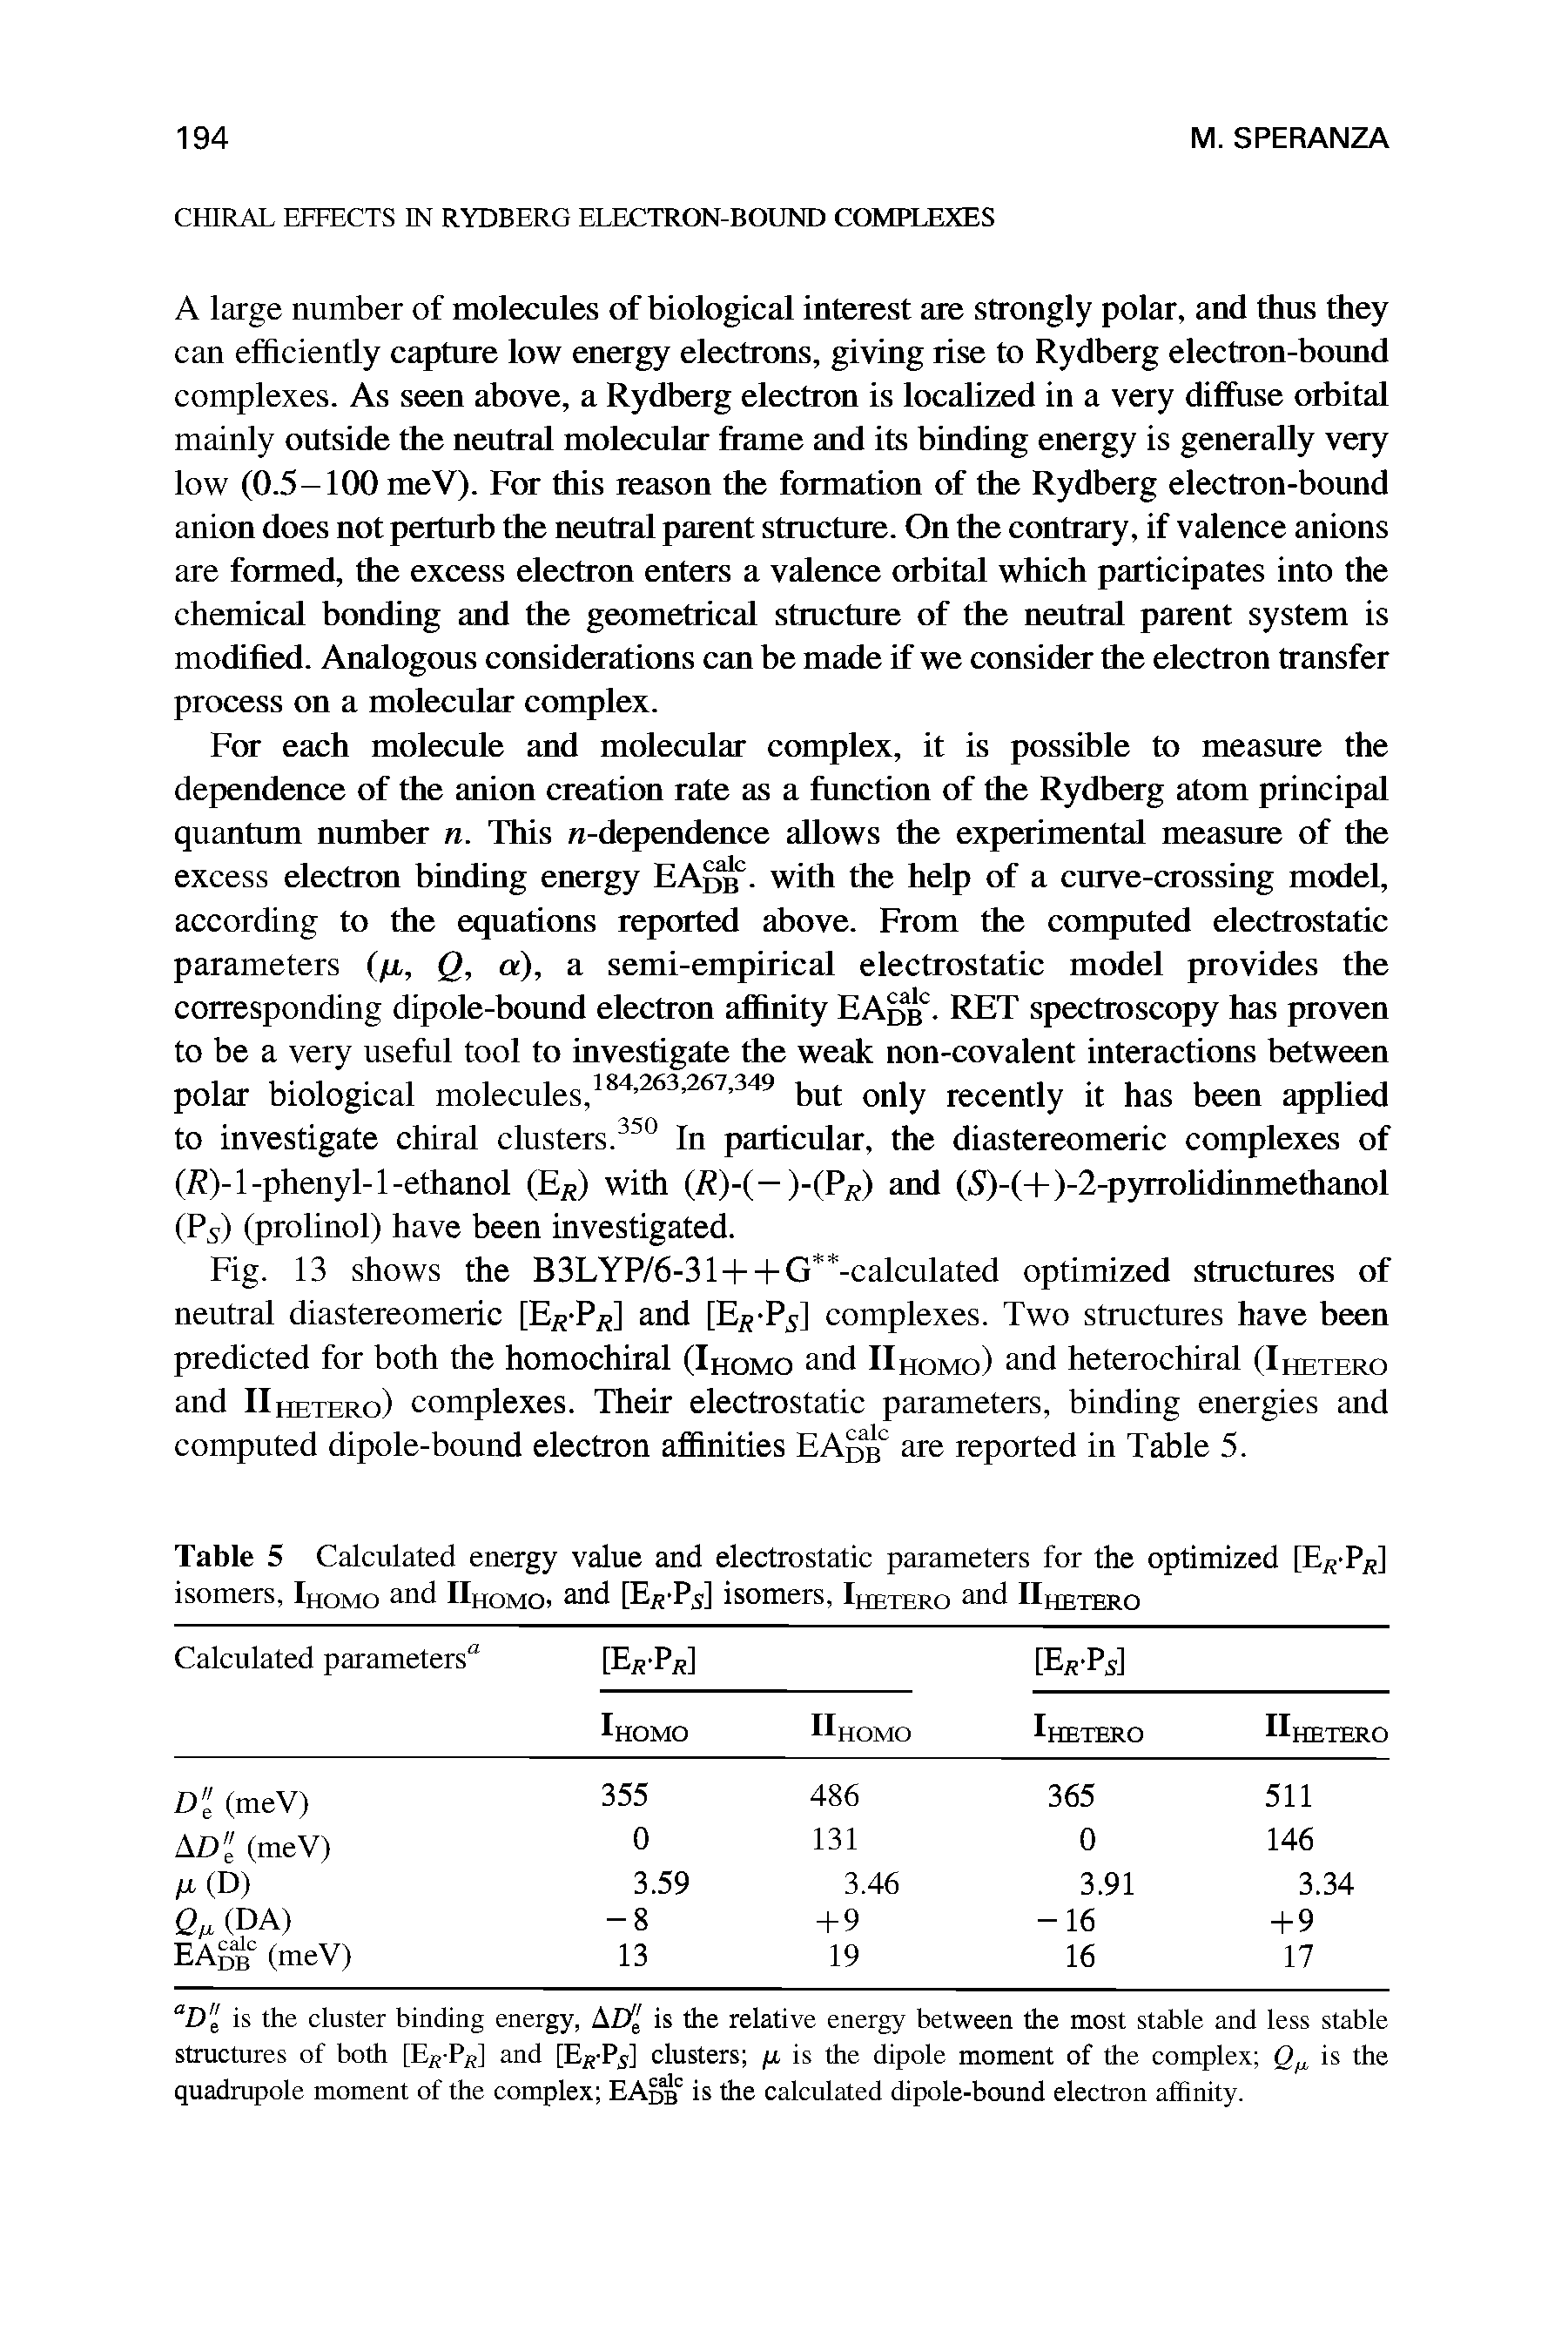 Table 5 Calculated energy value and electrostatic parameters for the optimized [E P ] isomers, Ihomo and IIhomo, and [E T ] isomers, Ihetero and IIhetero...